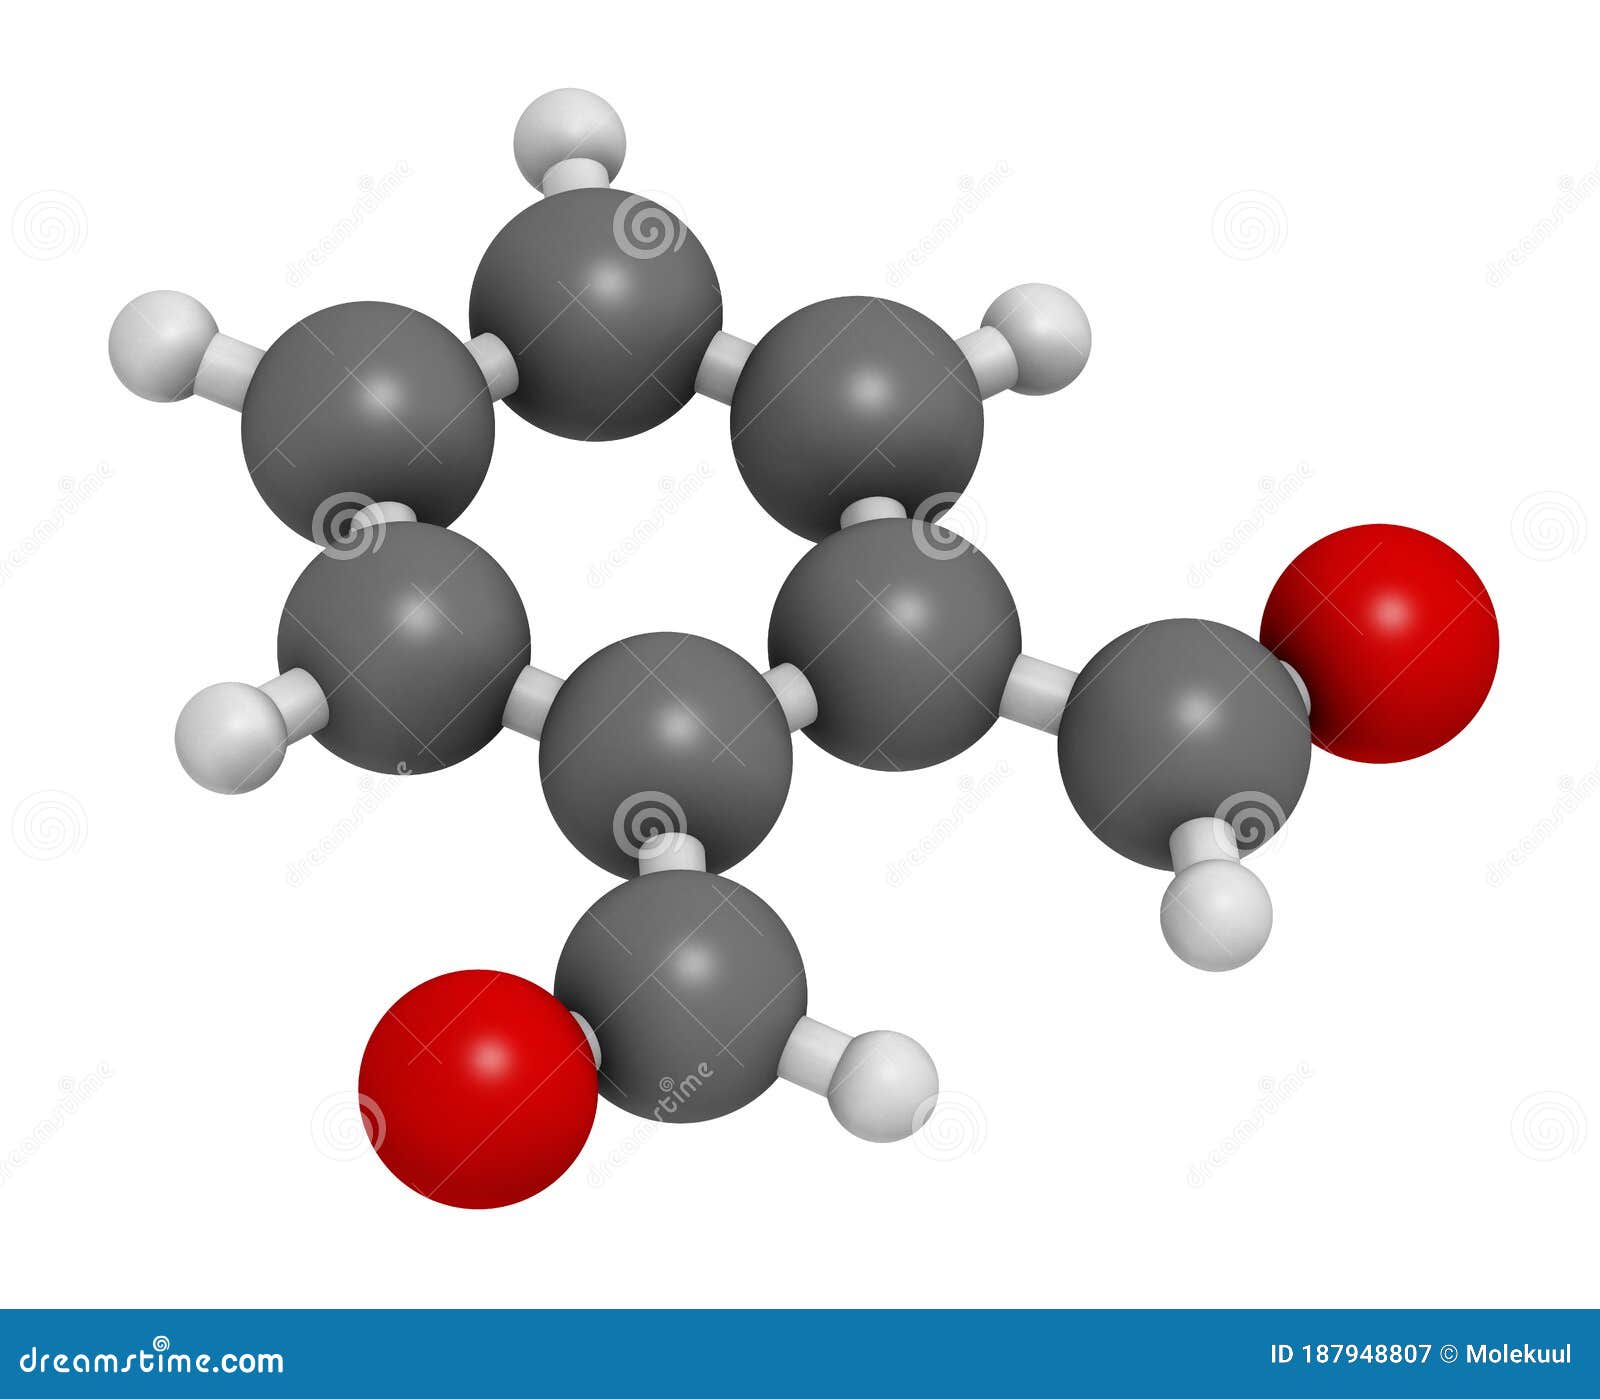 phthalaldehyde ortho-phthalaldehyde, opa disinfectant molecule. 3d rendering. atoms are represented as spheres with.